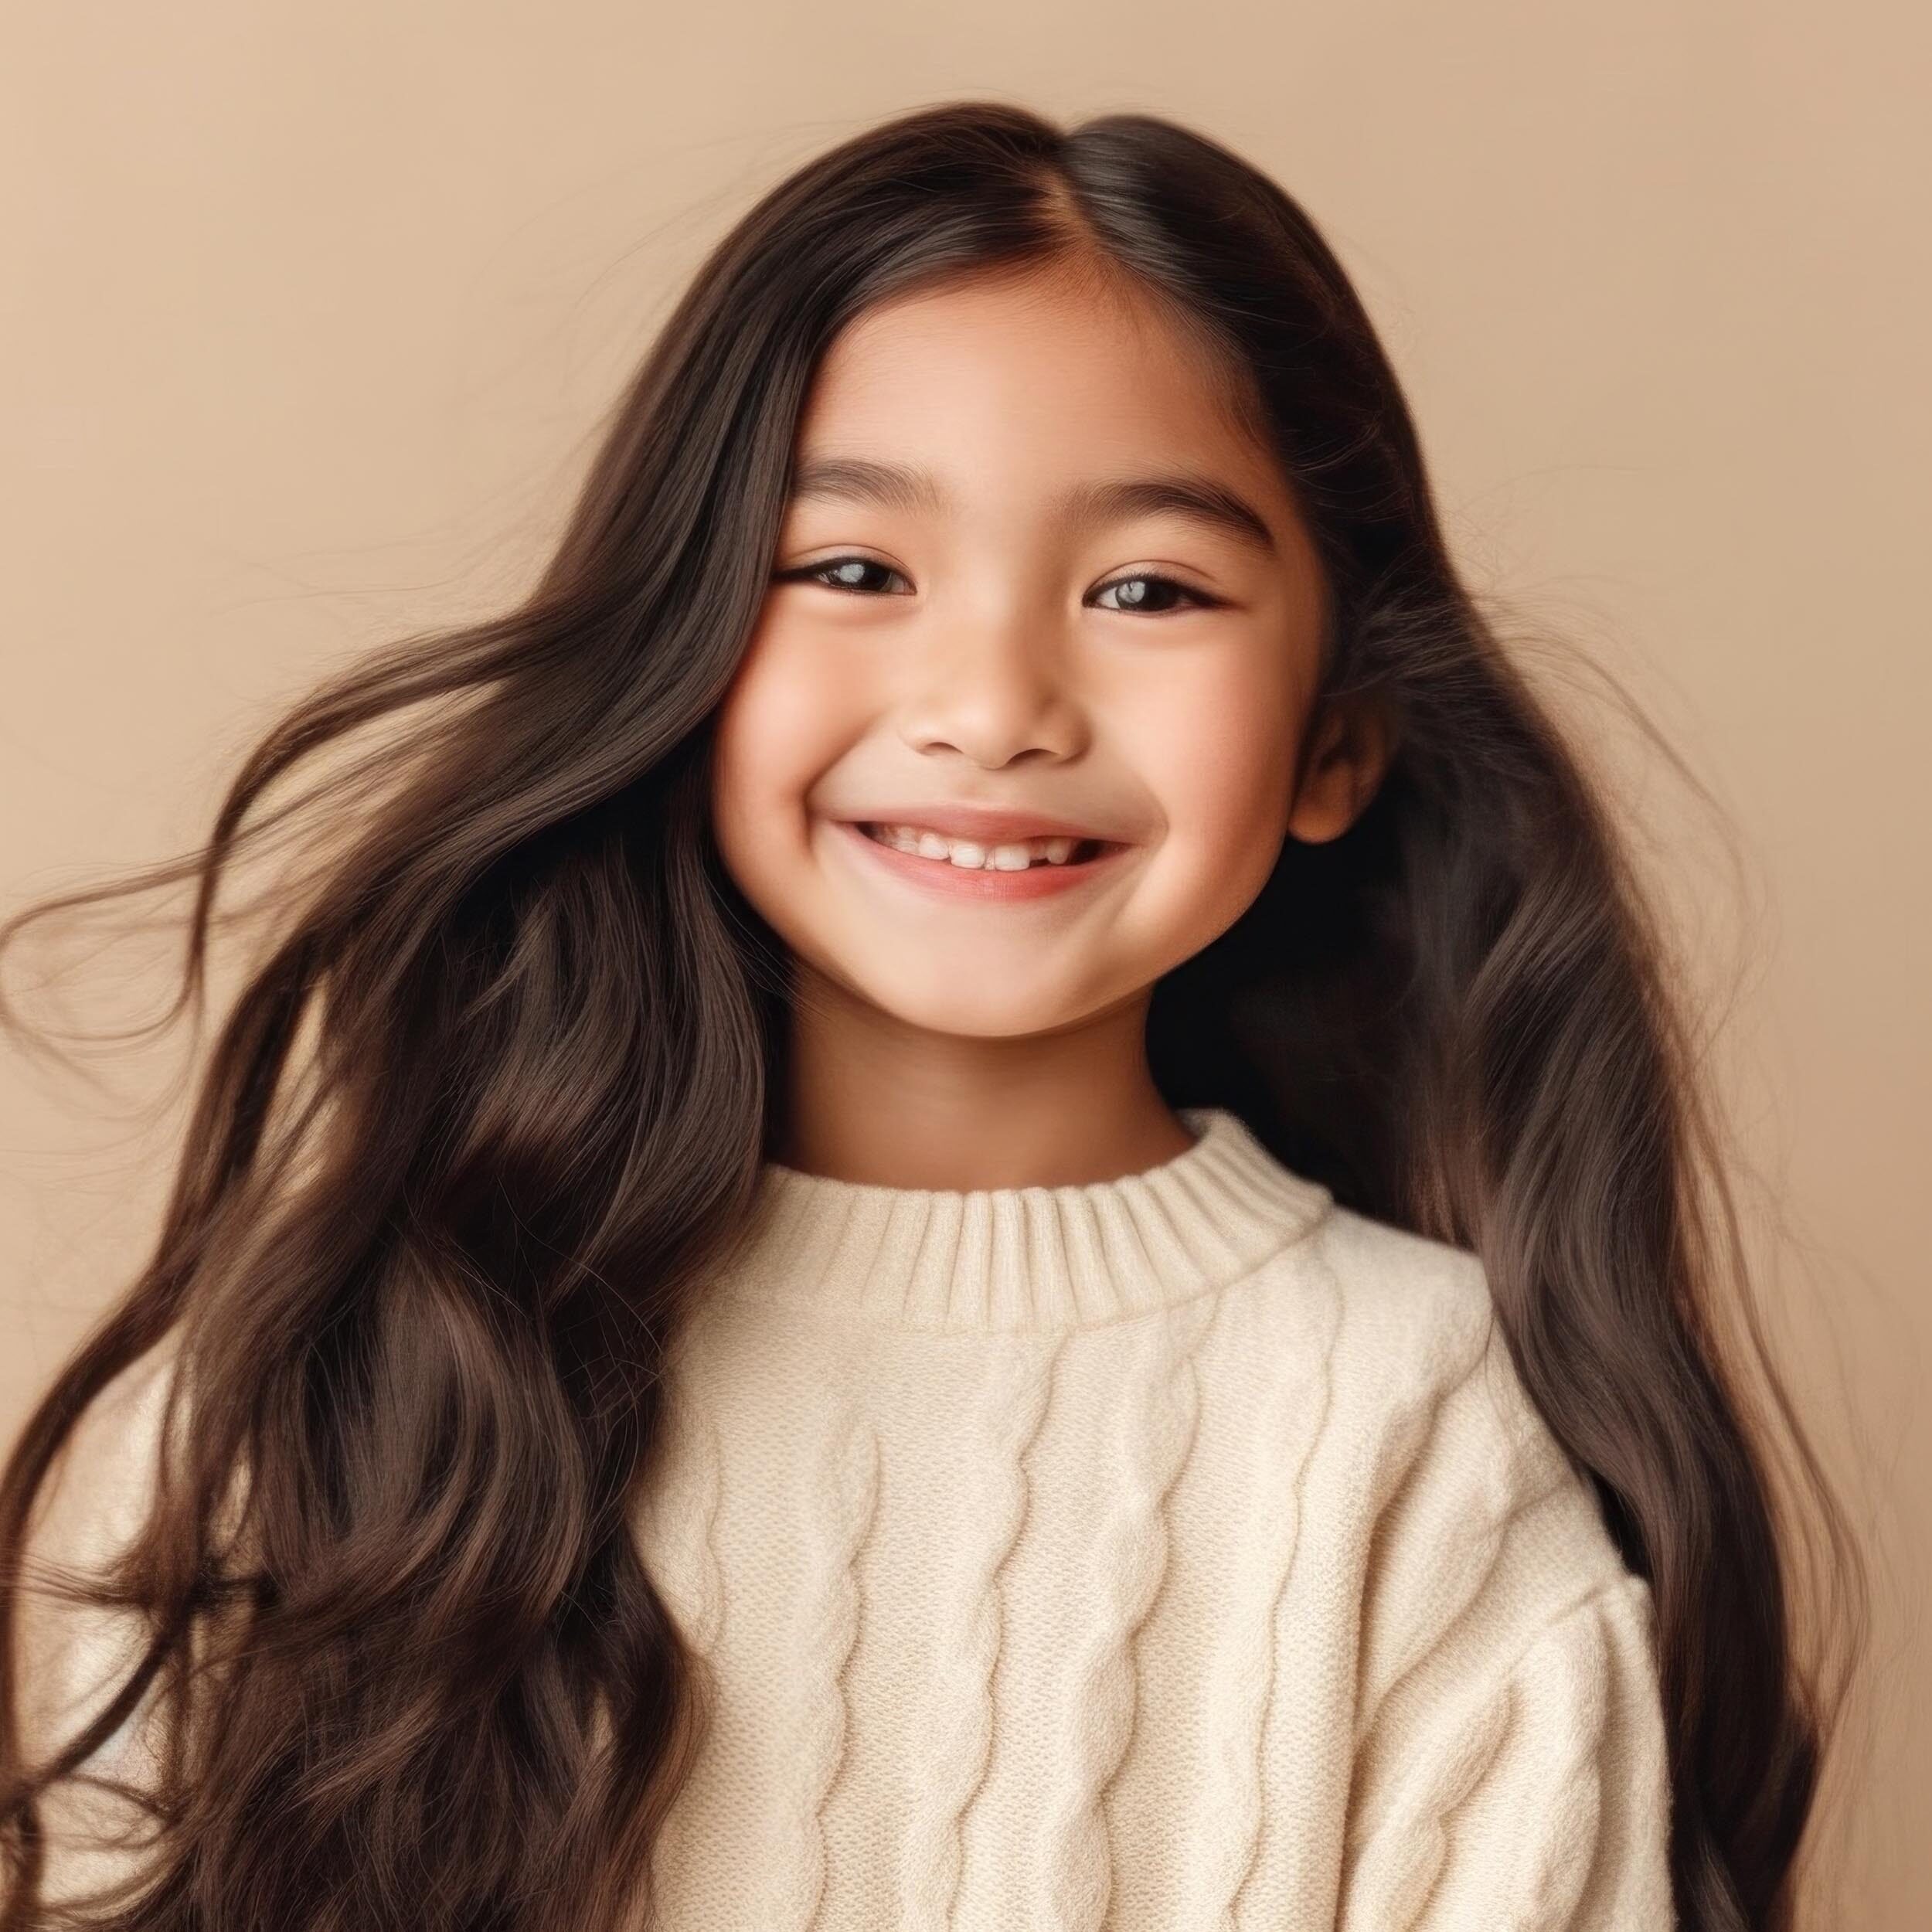 Smiling young girl with long dark hair wearing a cream cable-knit sweater.